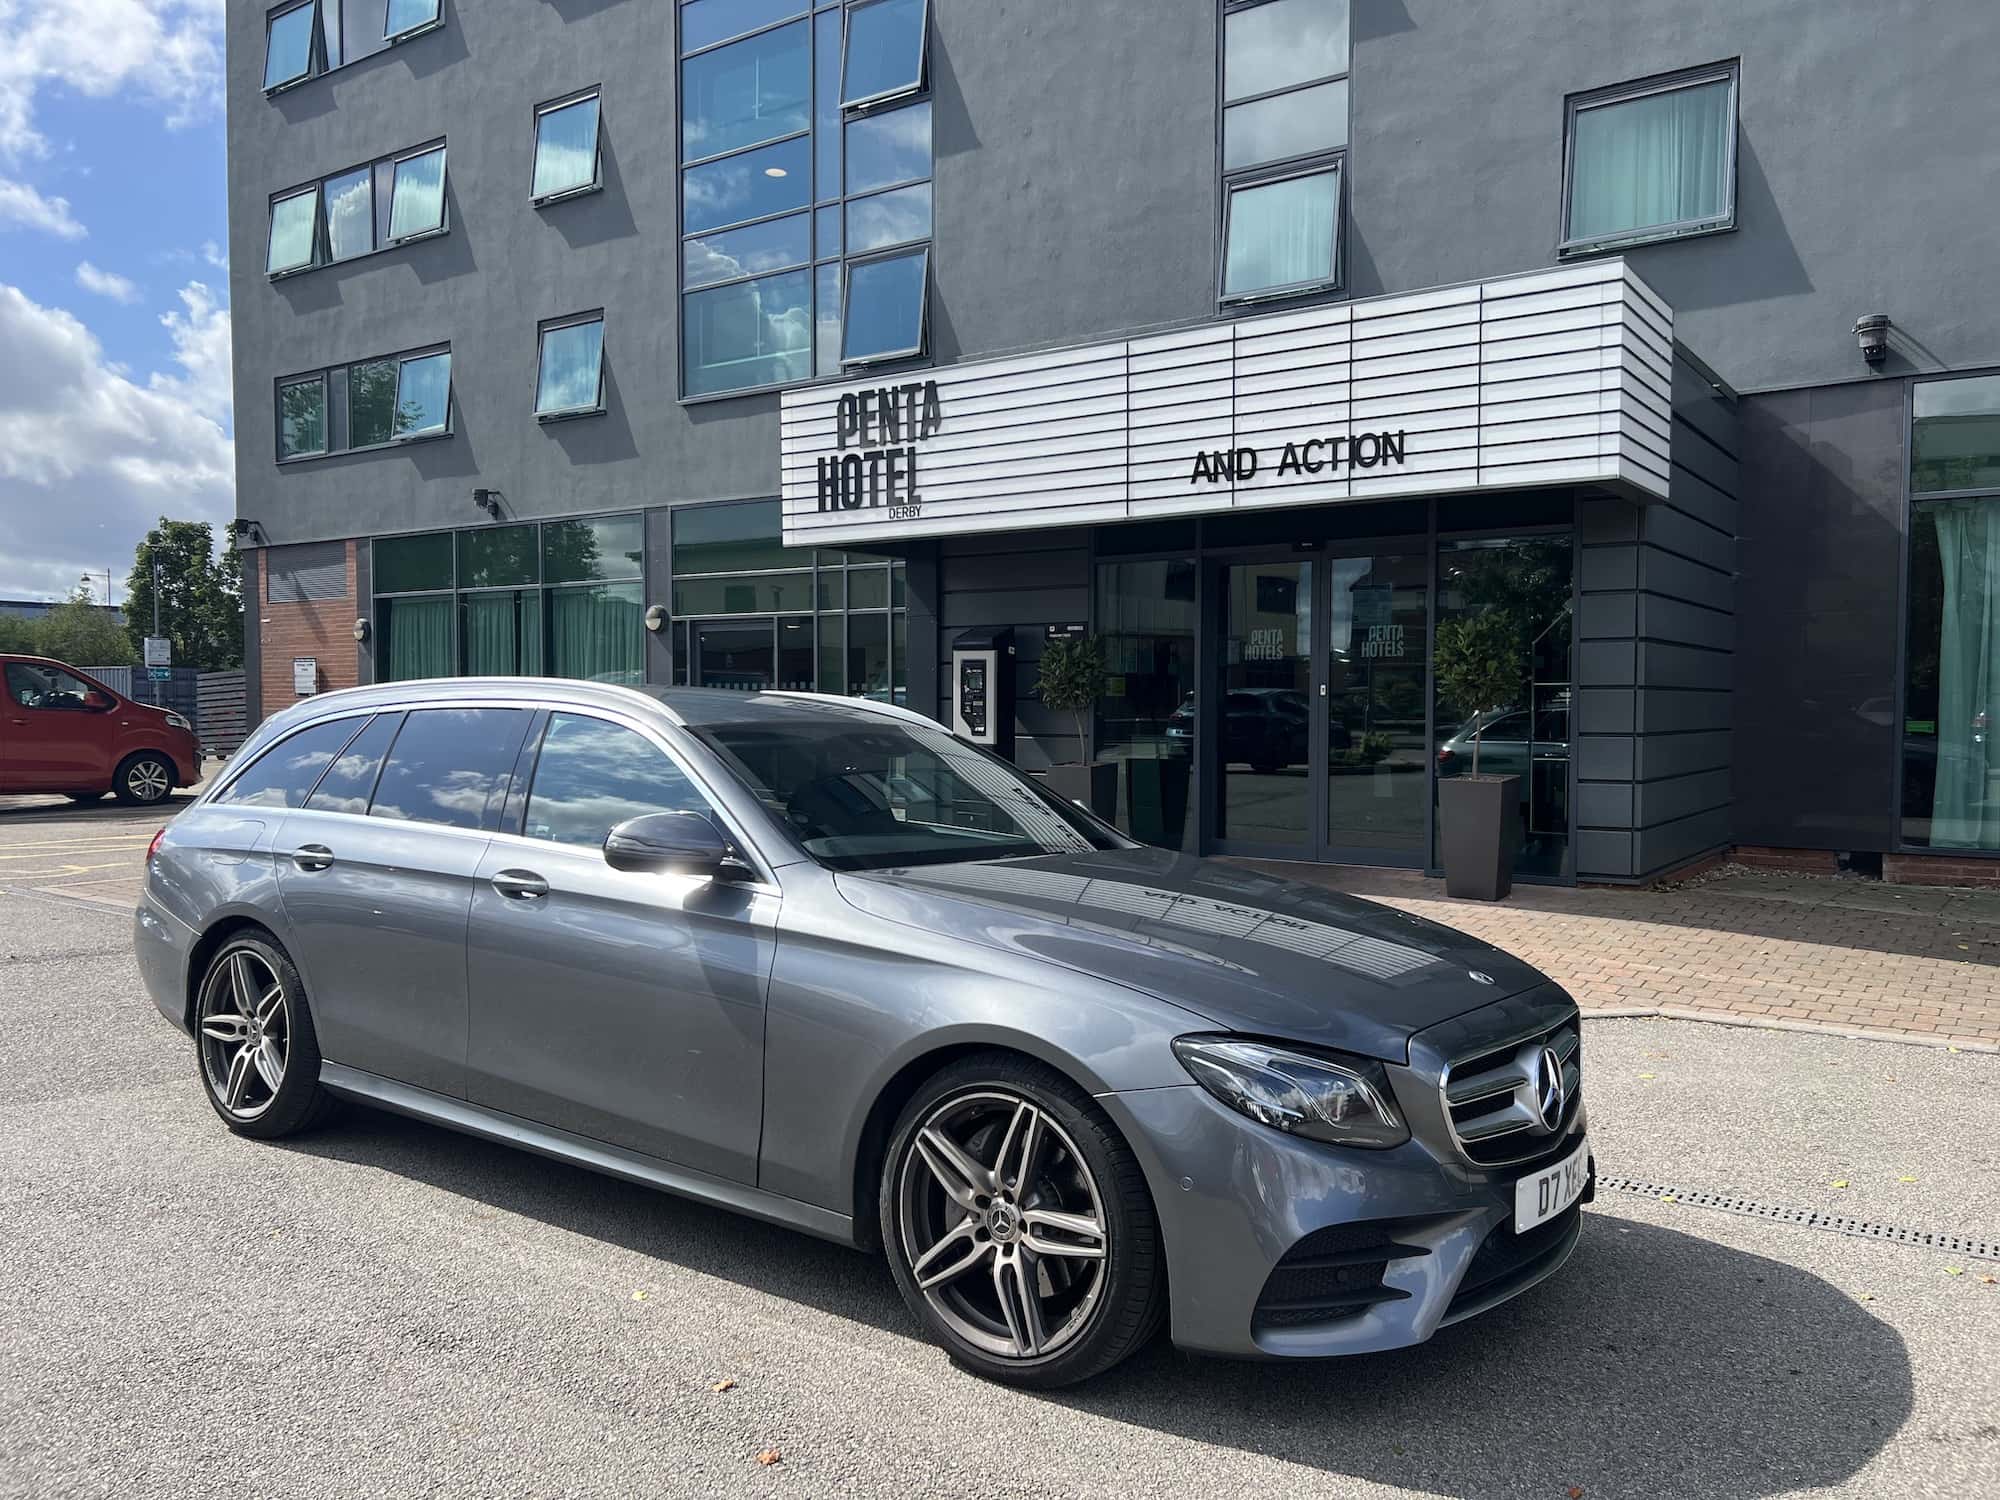 Mercedes E Class picking up at a Derby Hotel